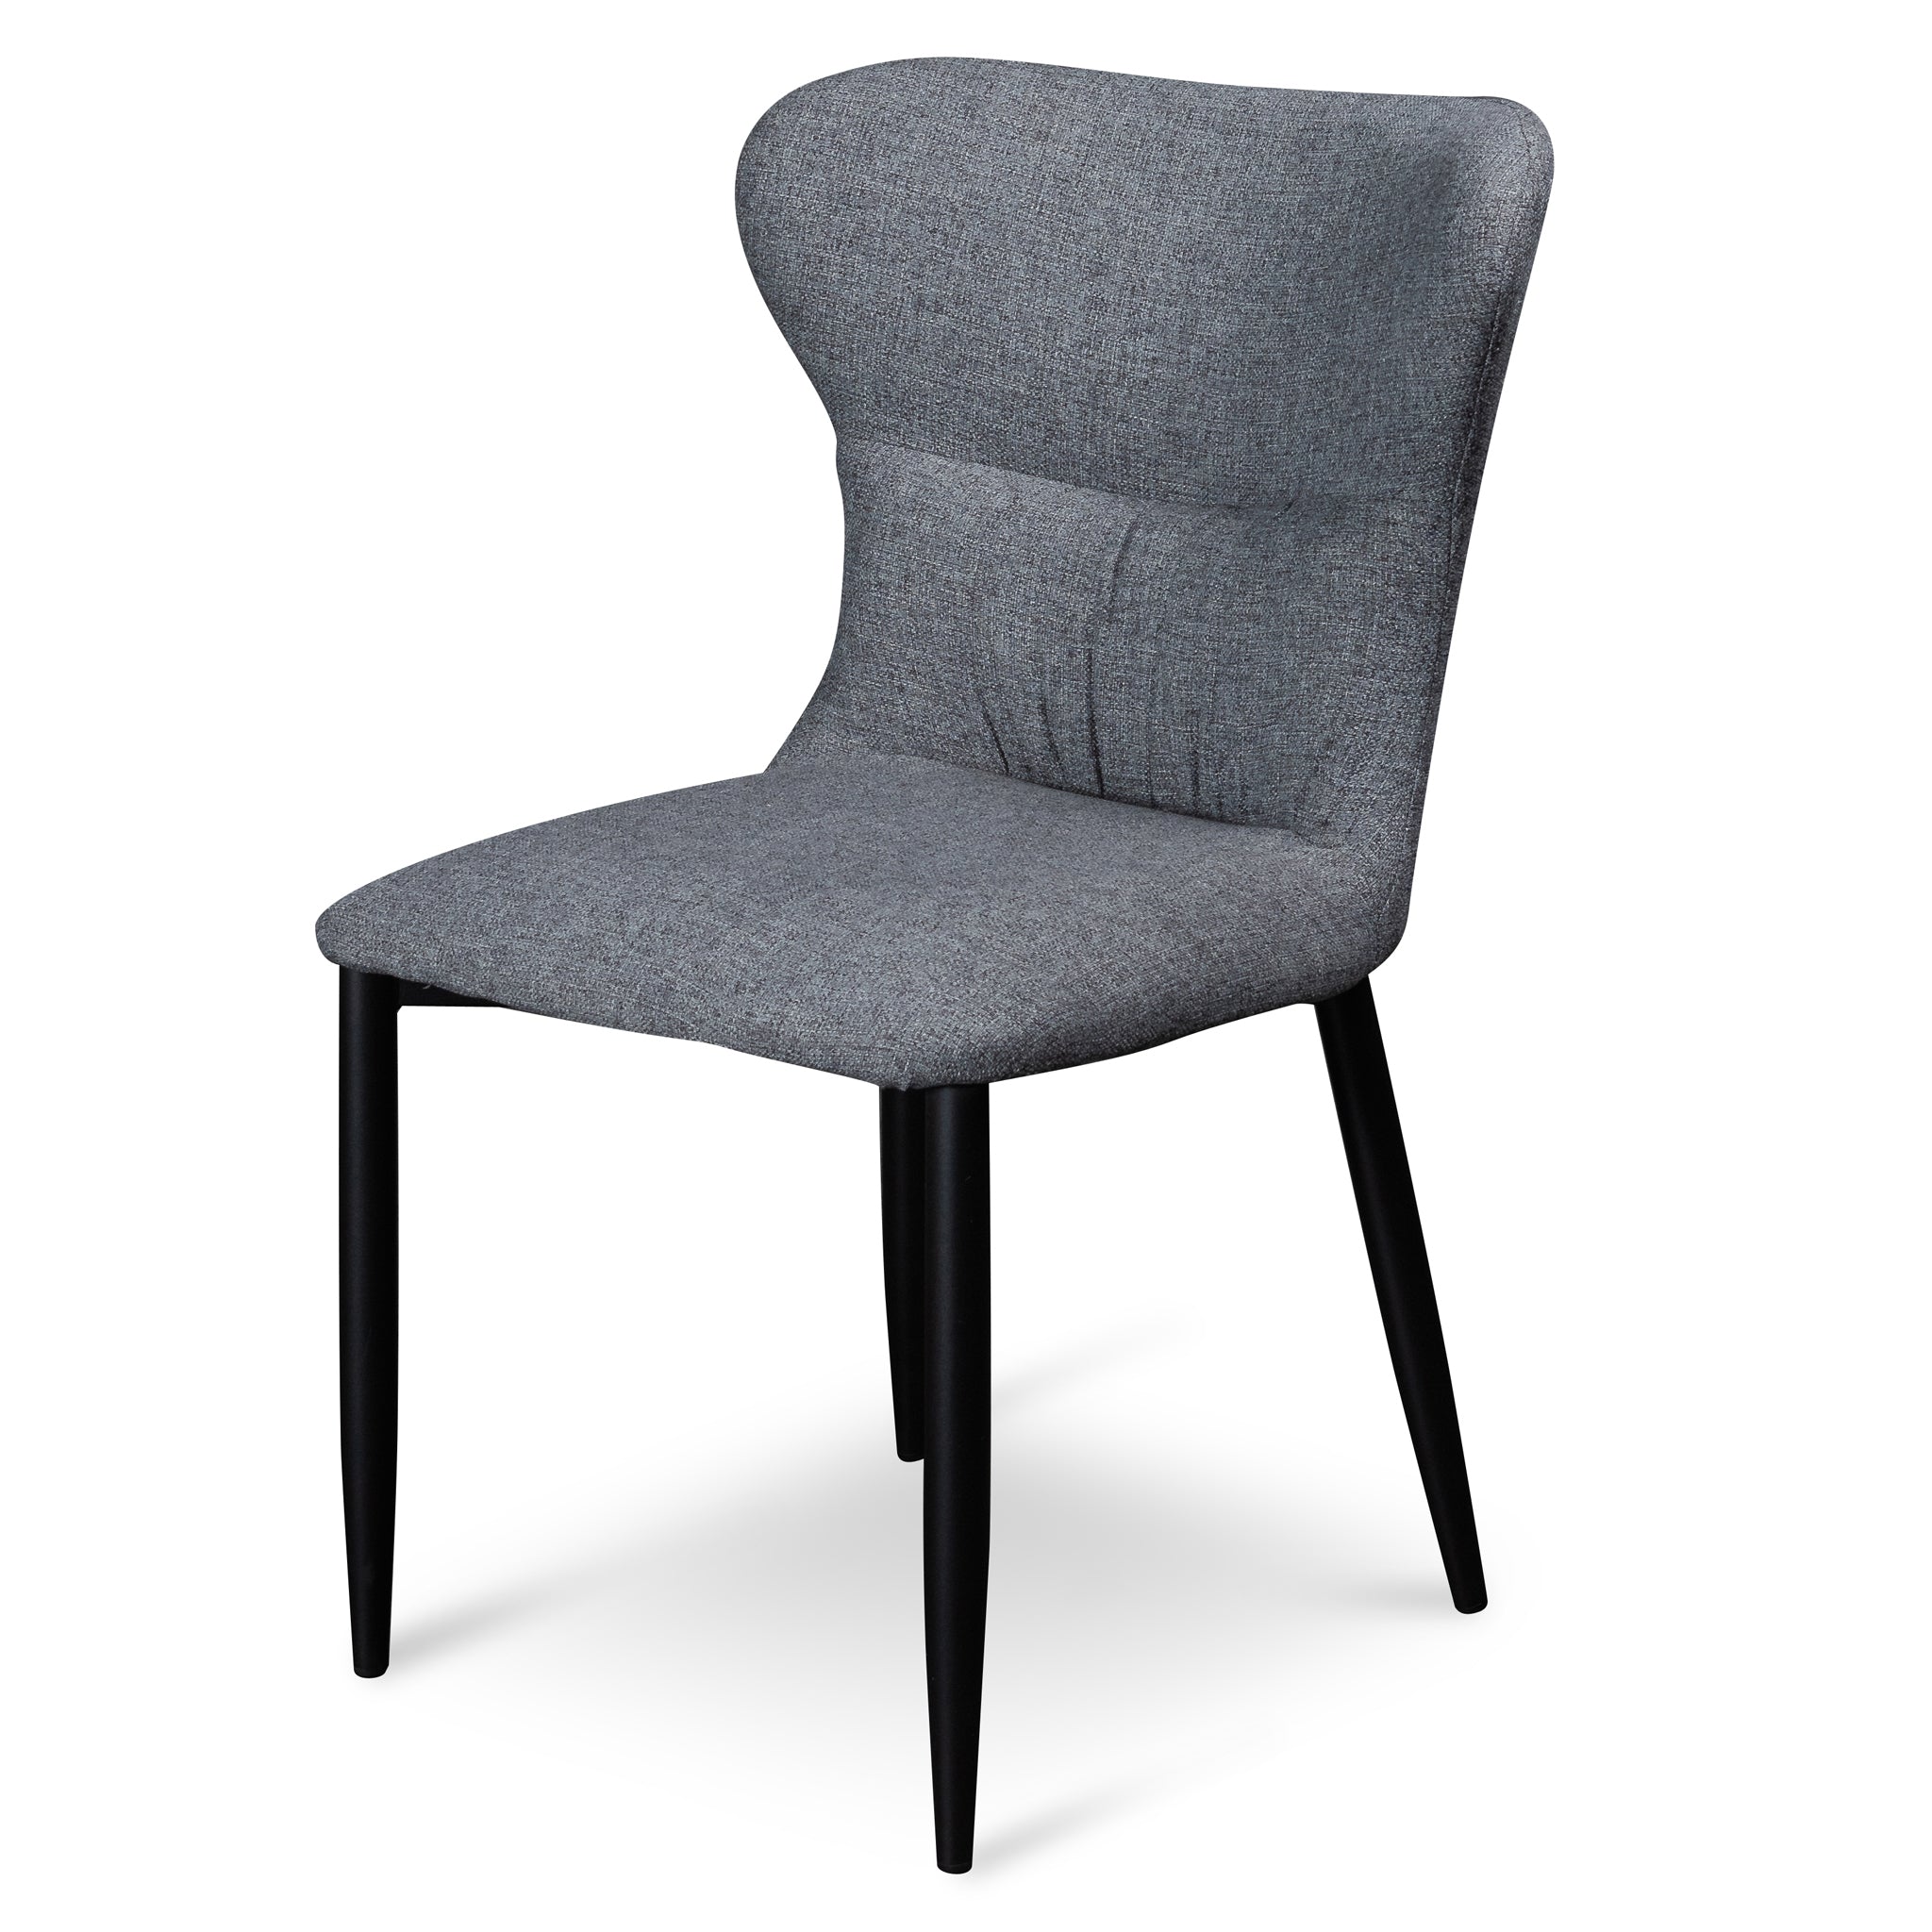 Pebble Grey with Black Legs Dining Chair